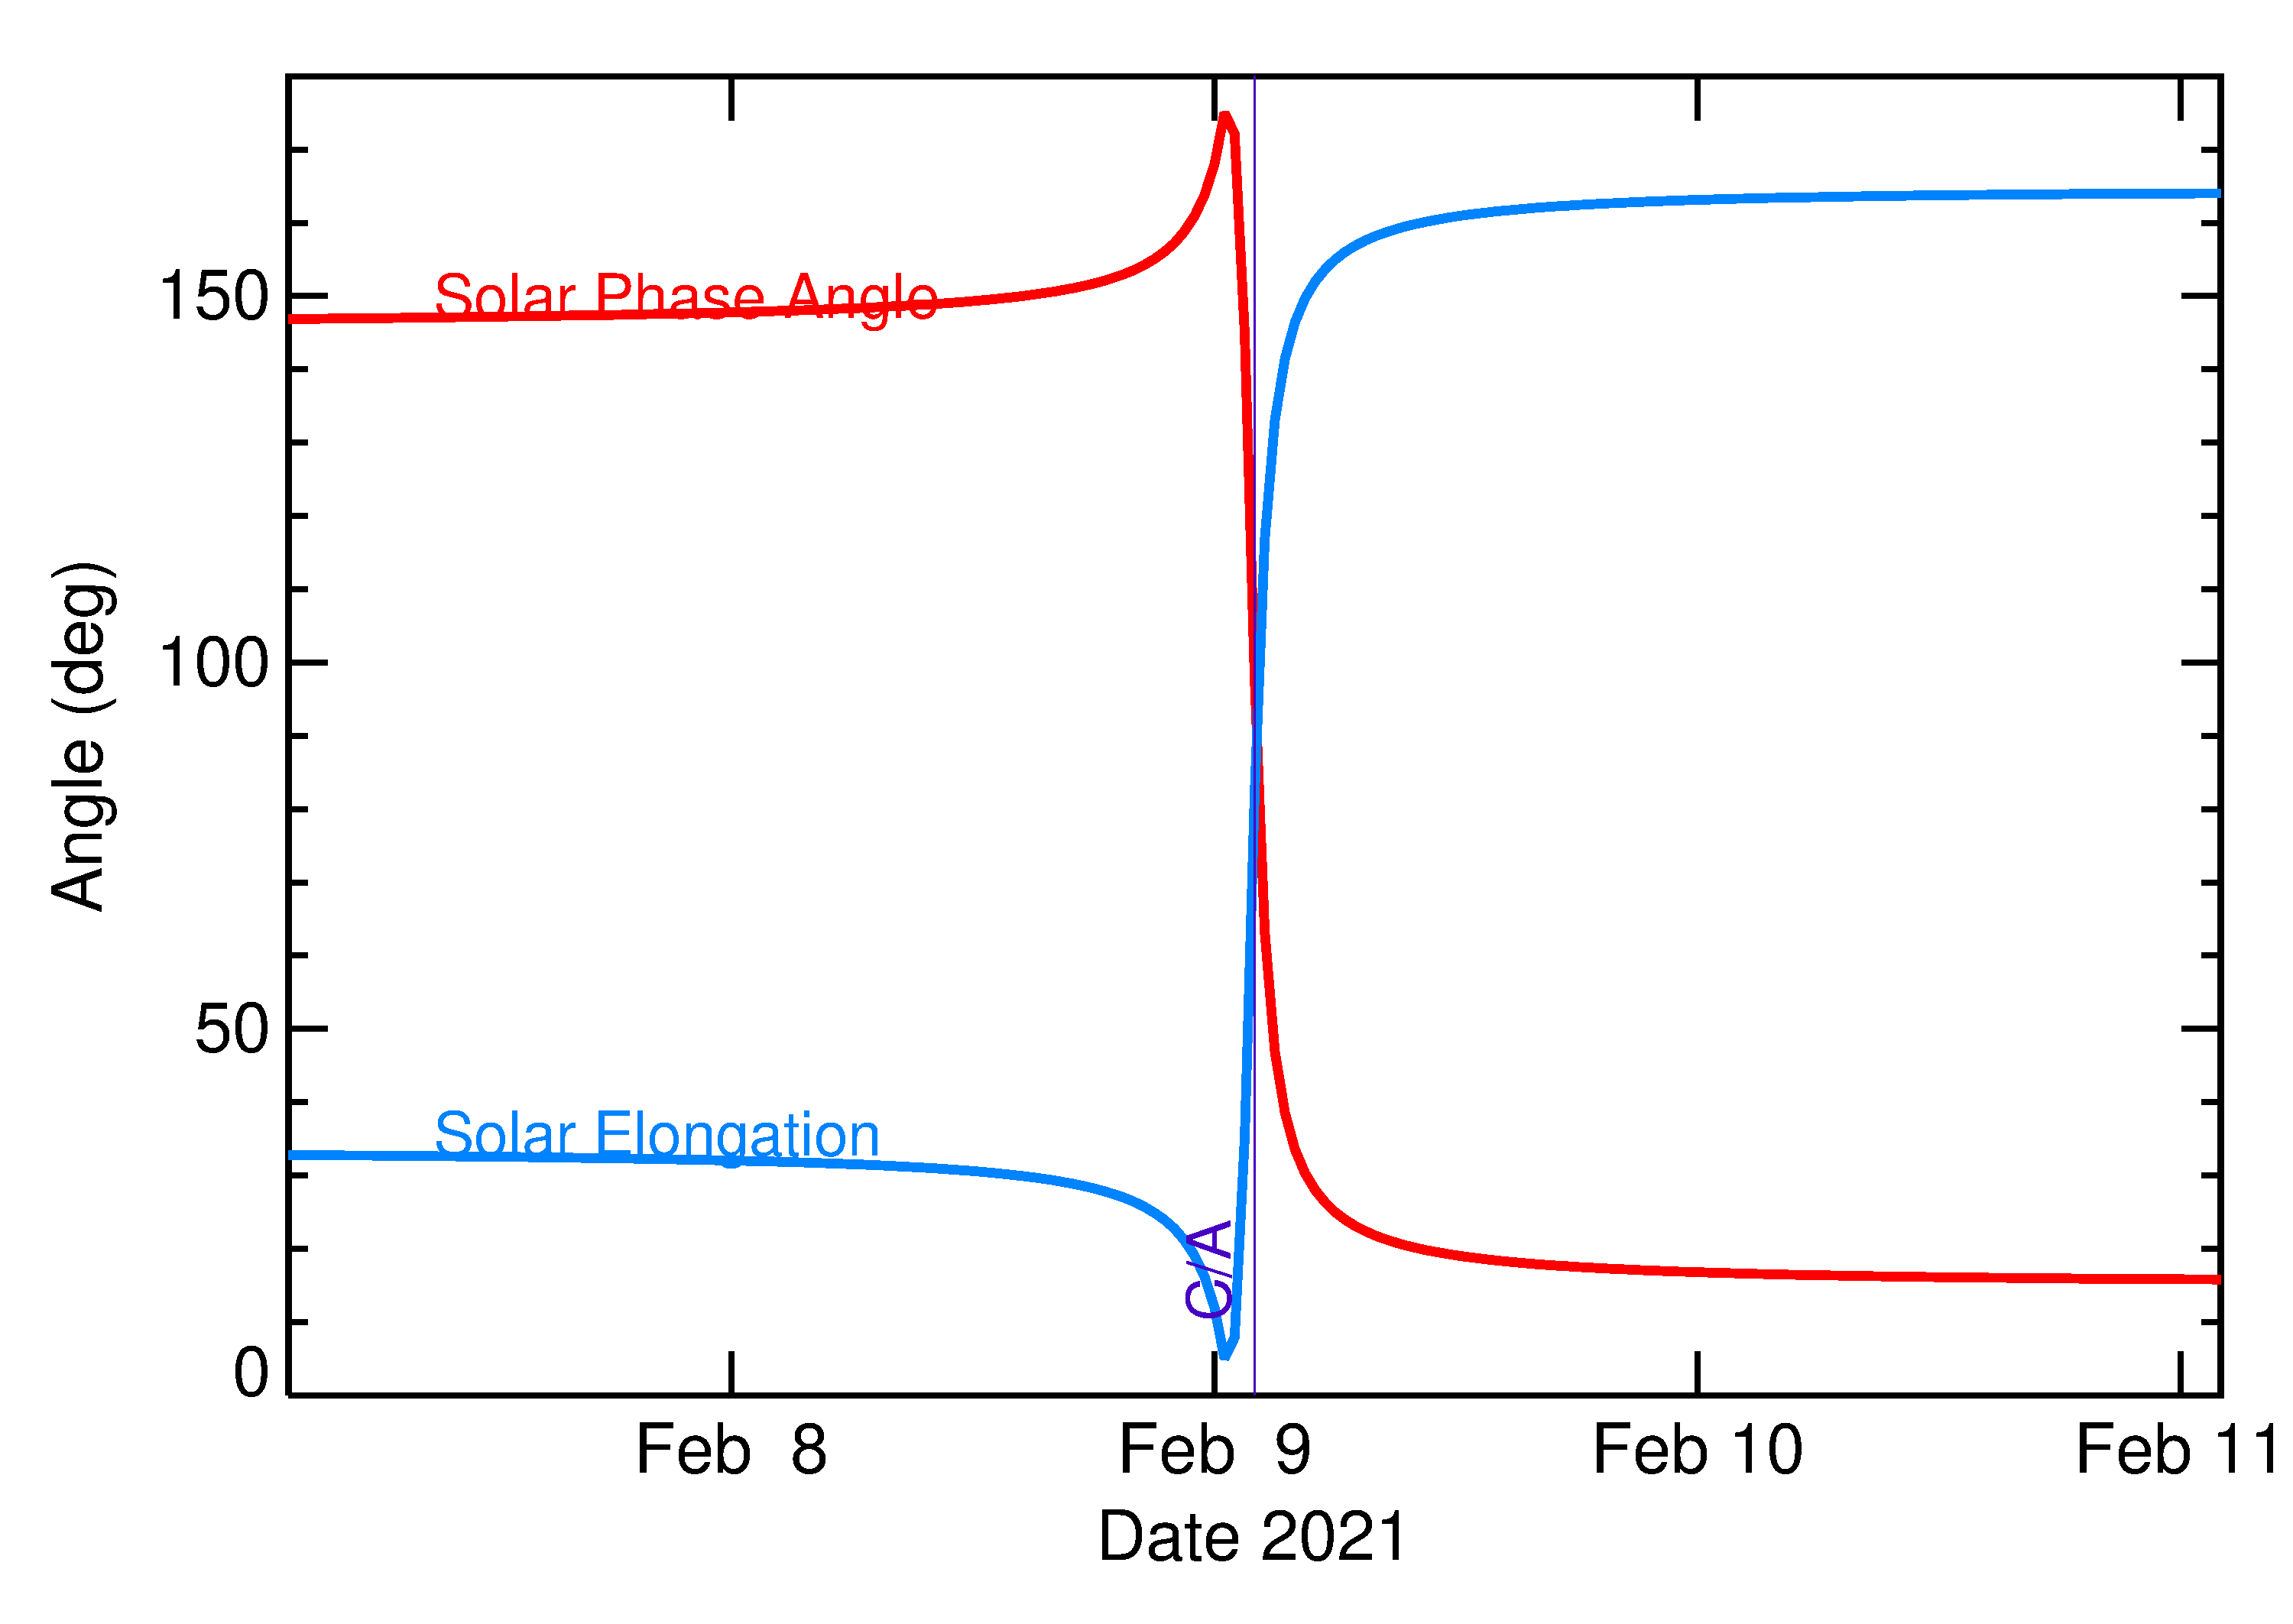 Solar Elongation and Solar Phase Angle of 2021 CZ3 in the days around closest approach